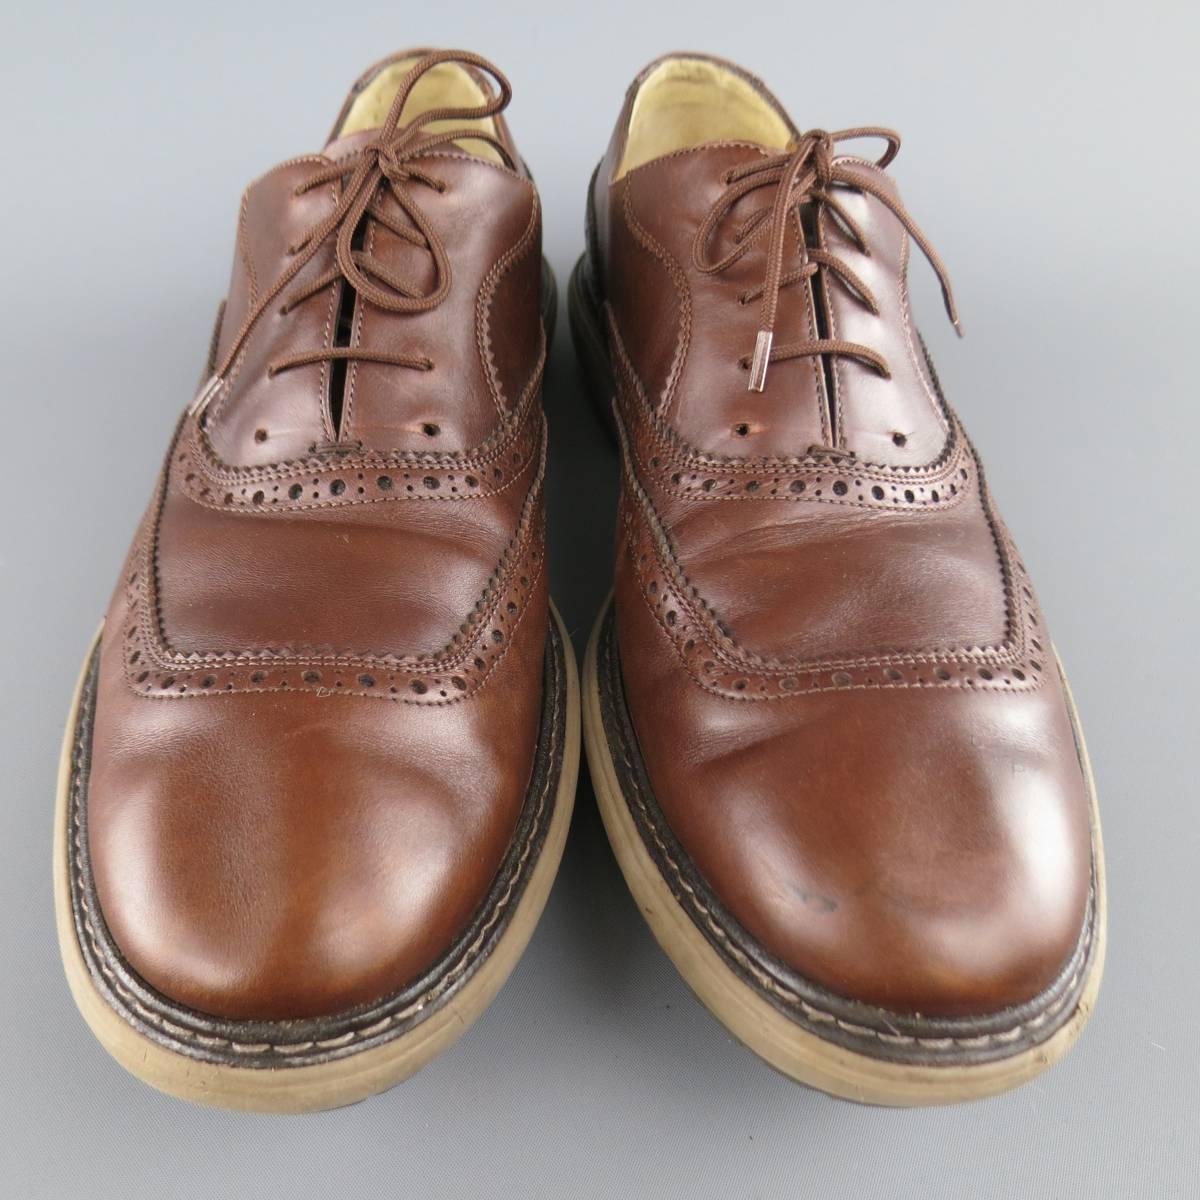 SALVATORE FERRAGAMO Shoes - Brogues Size 11 Brown Leather Rubber Sole Lace Up In Good Condition In San Francisco, CA